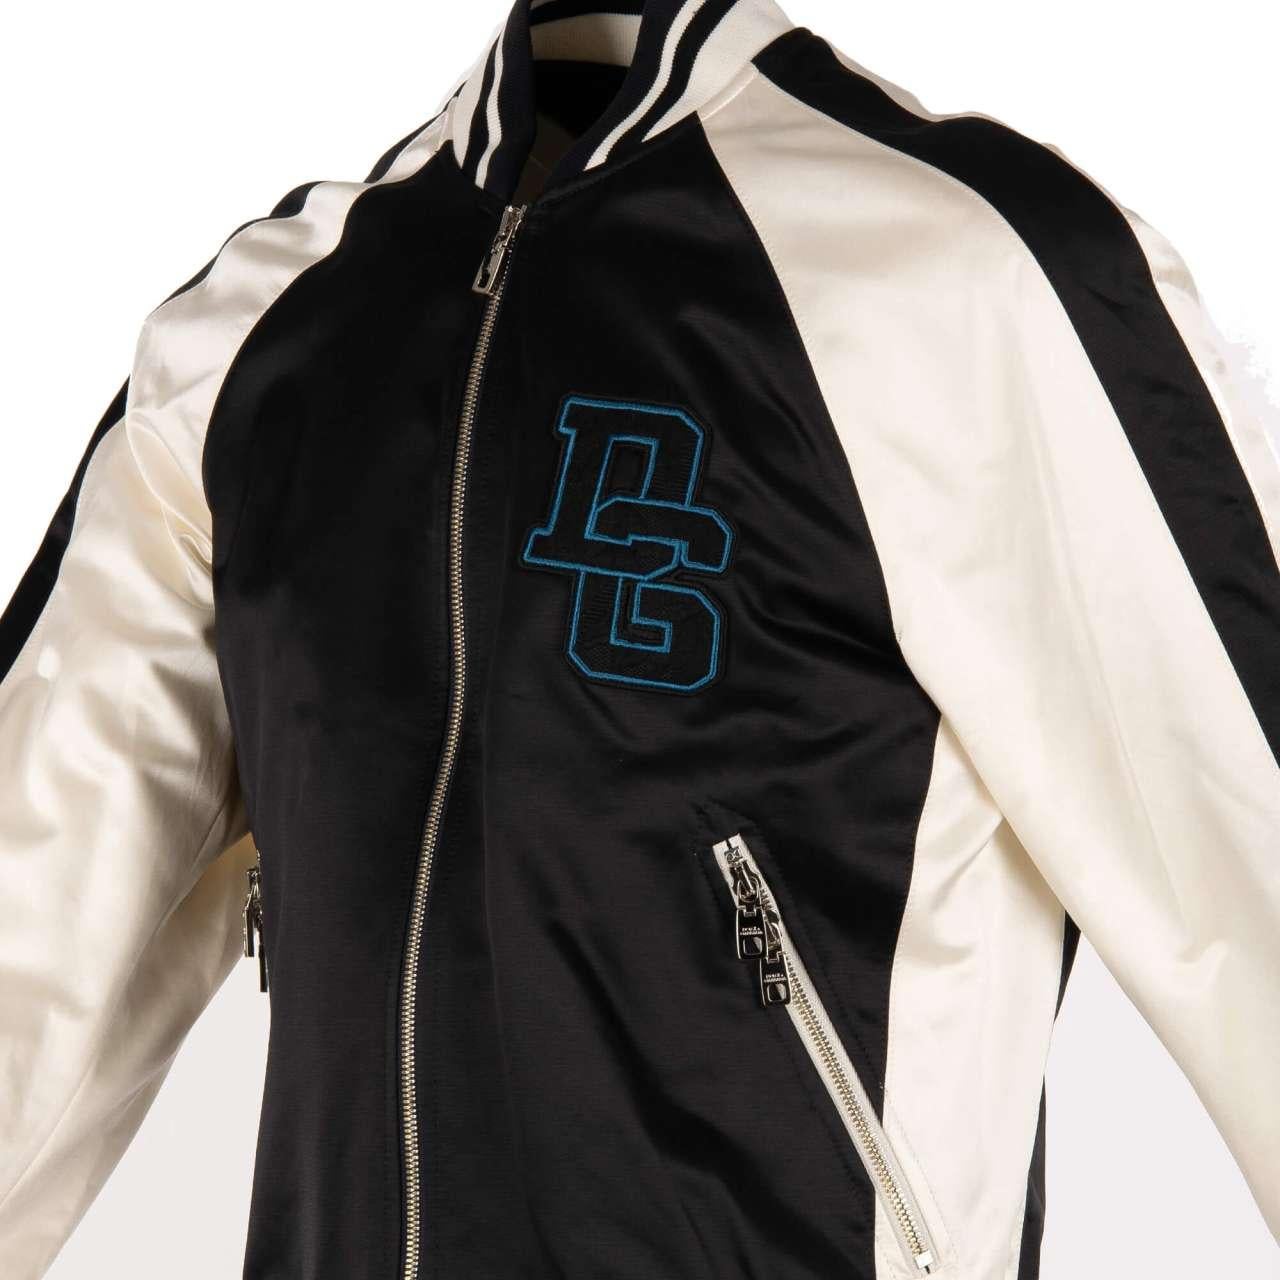 Dolce & Gabbana - Varsity Jacket with DG Logo and Zips Black White 46 In Excellent Condition For Sale In Erkrath, DE